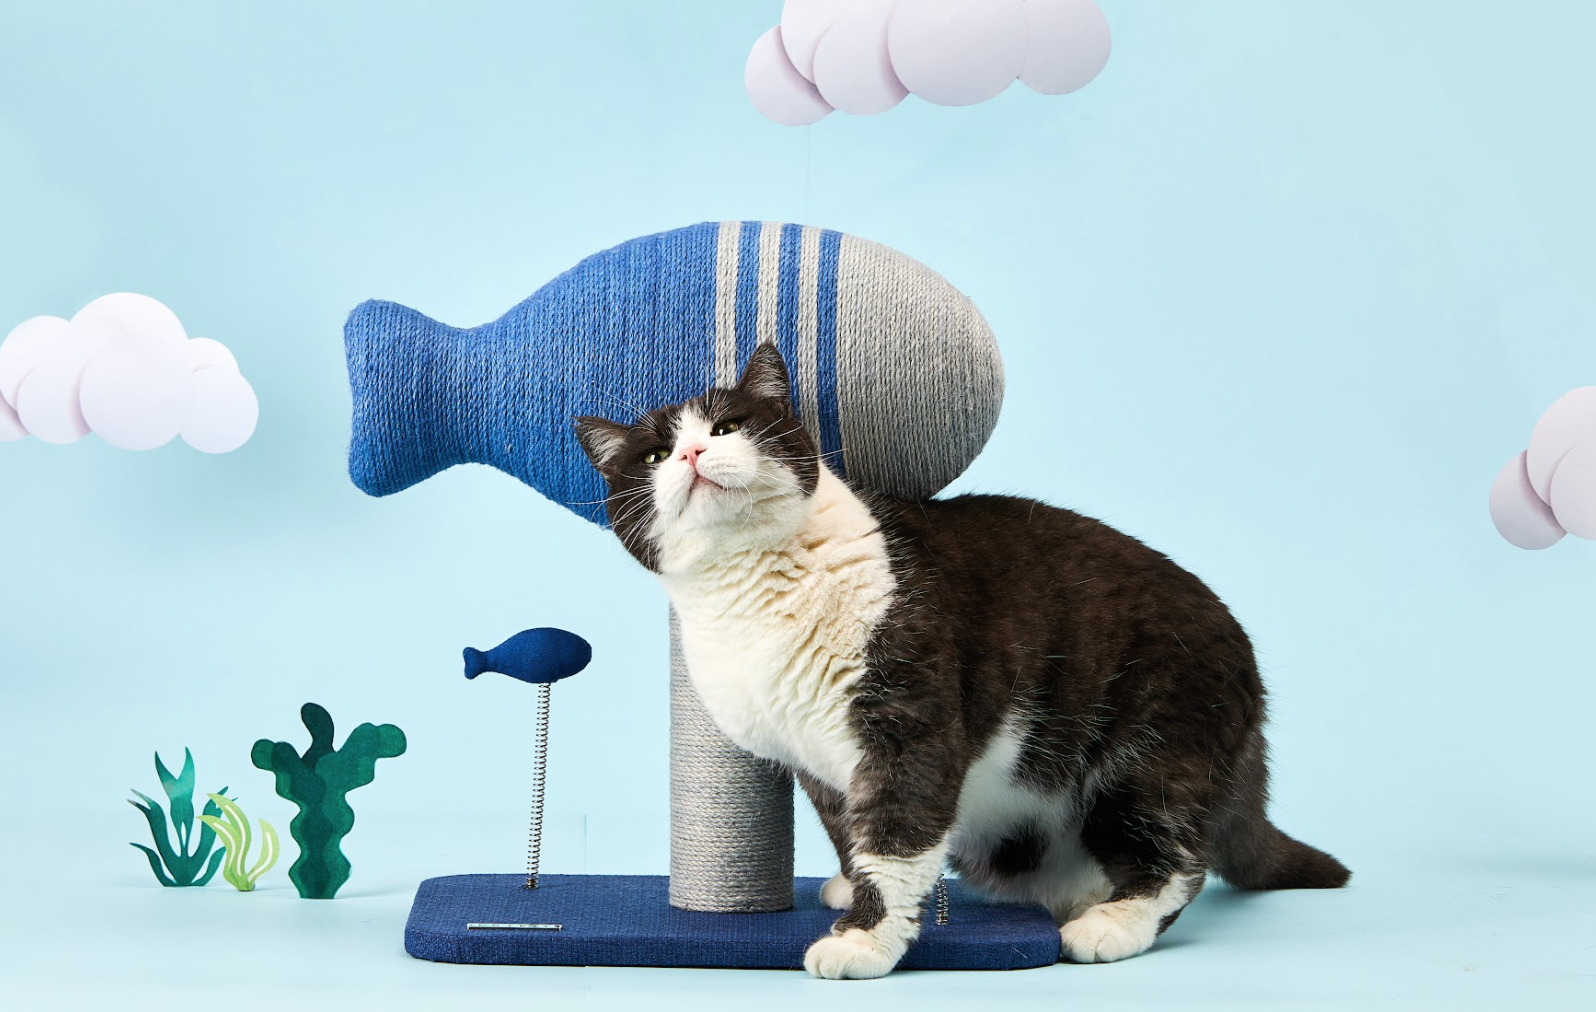 Cat playfully looks up while in front of scratching toy shaped like giant fish